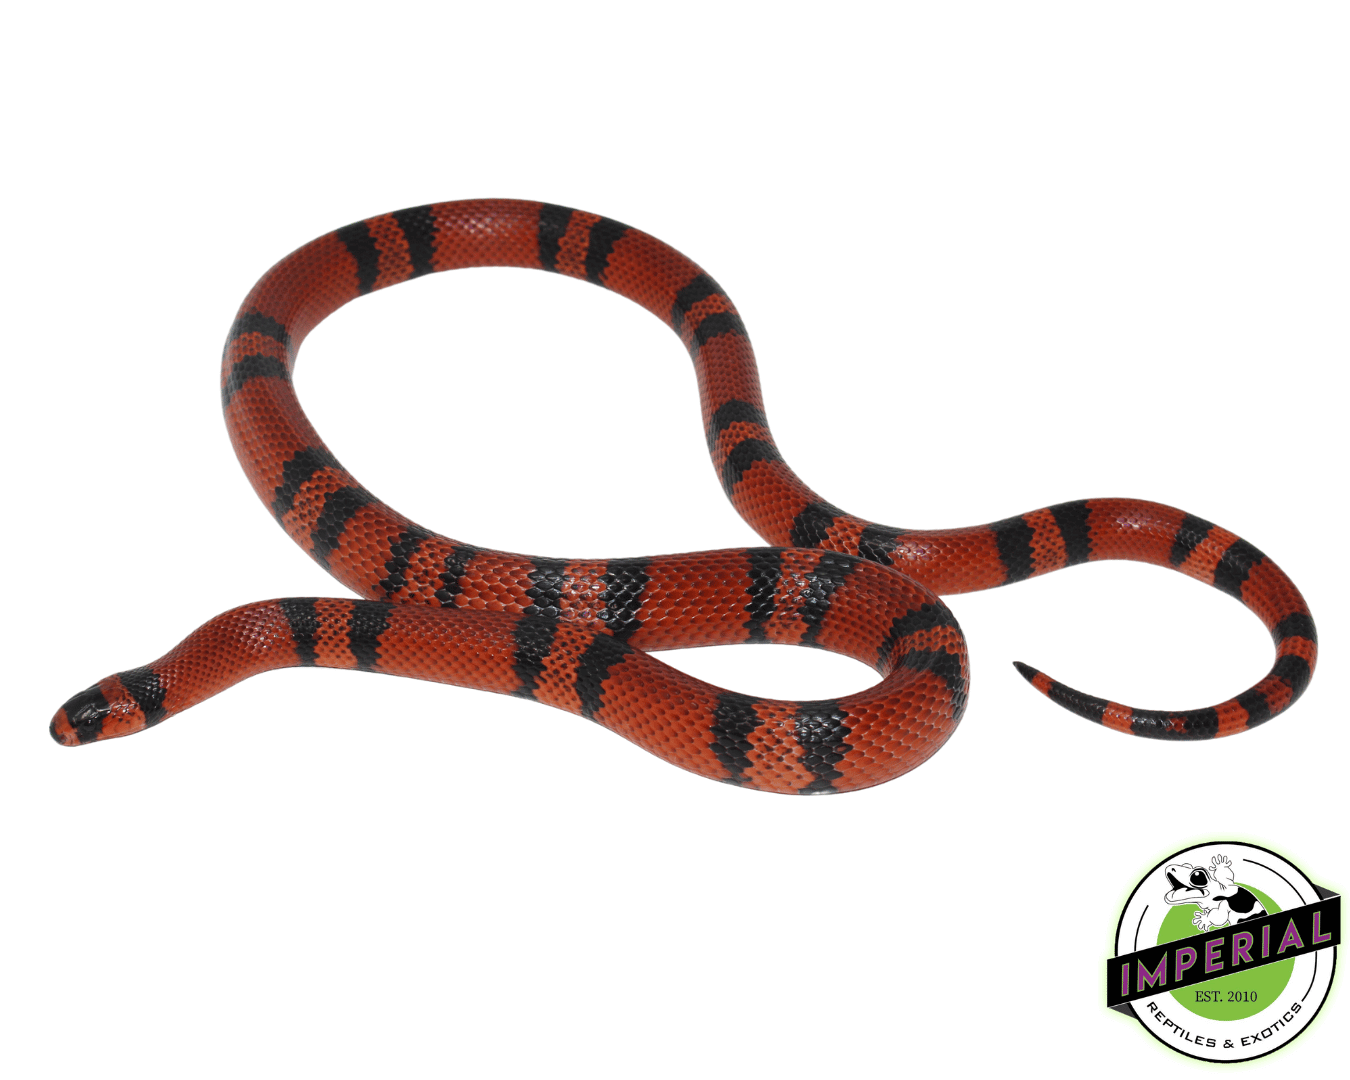 adult milksnake for sale online at cheap prices, buy reptiles near me